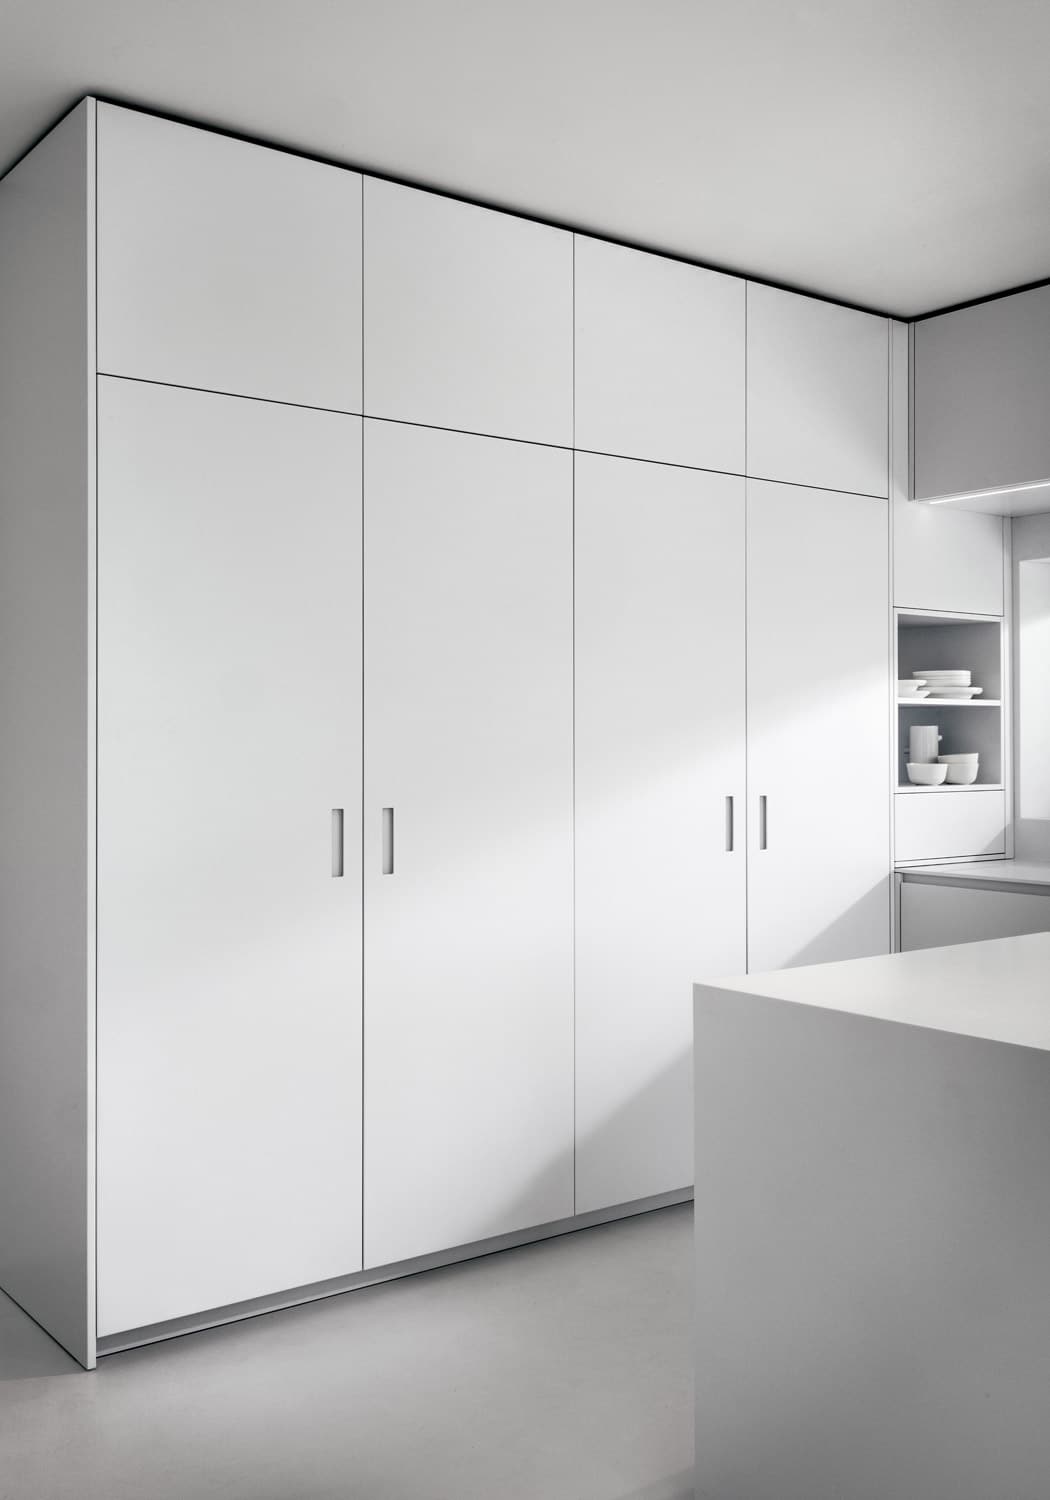 The tall cabinets are accessed through pocket doors with Oslo handles. 